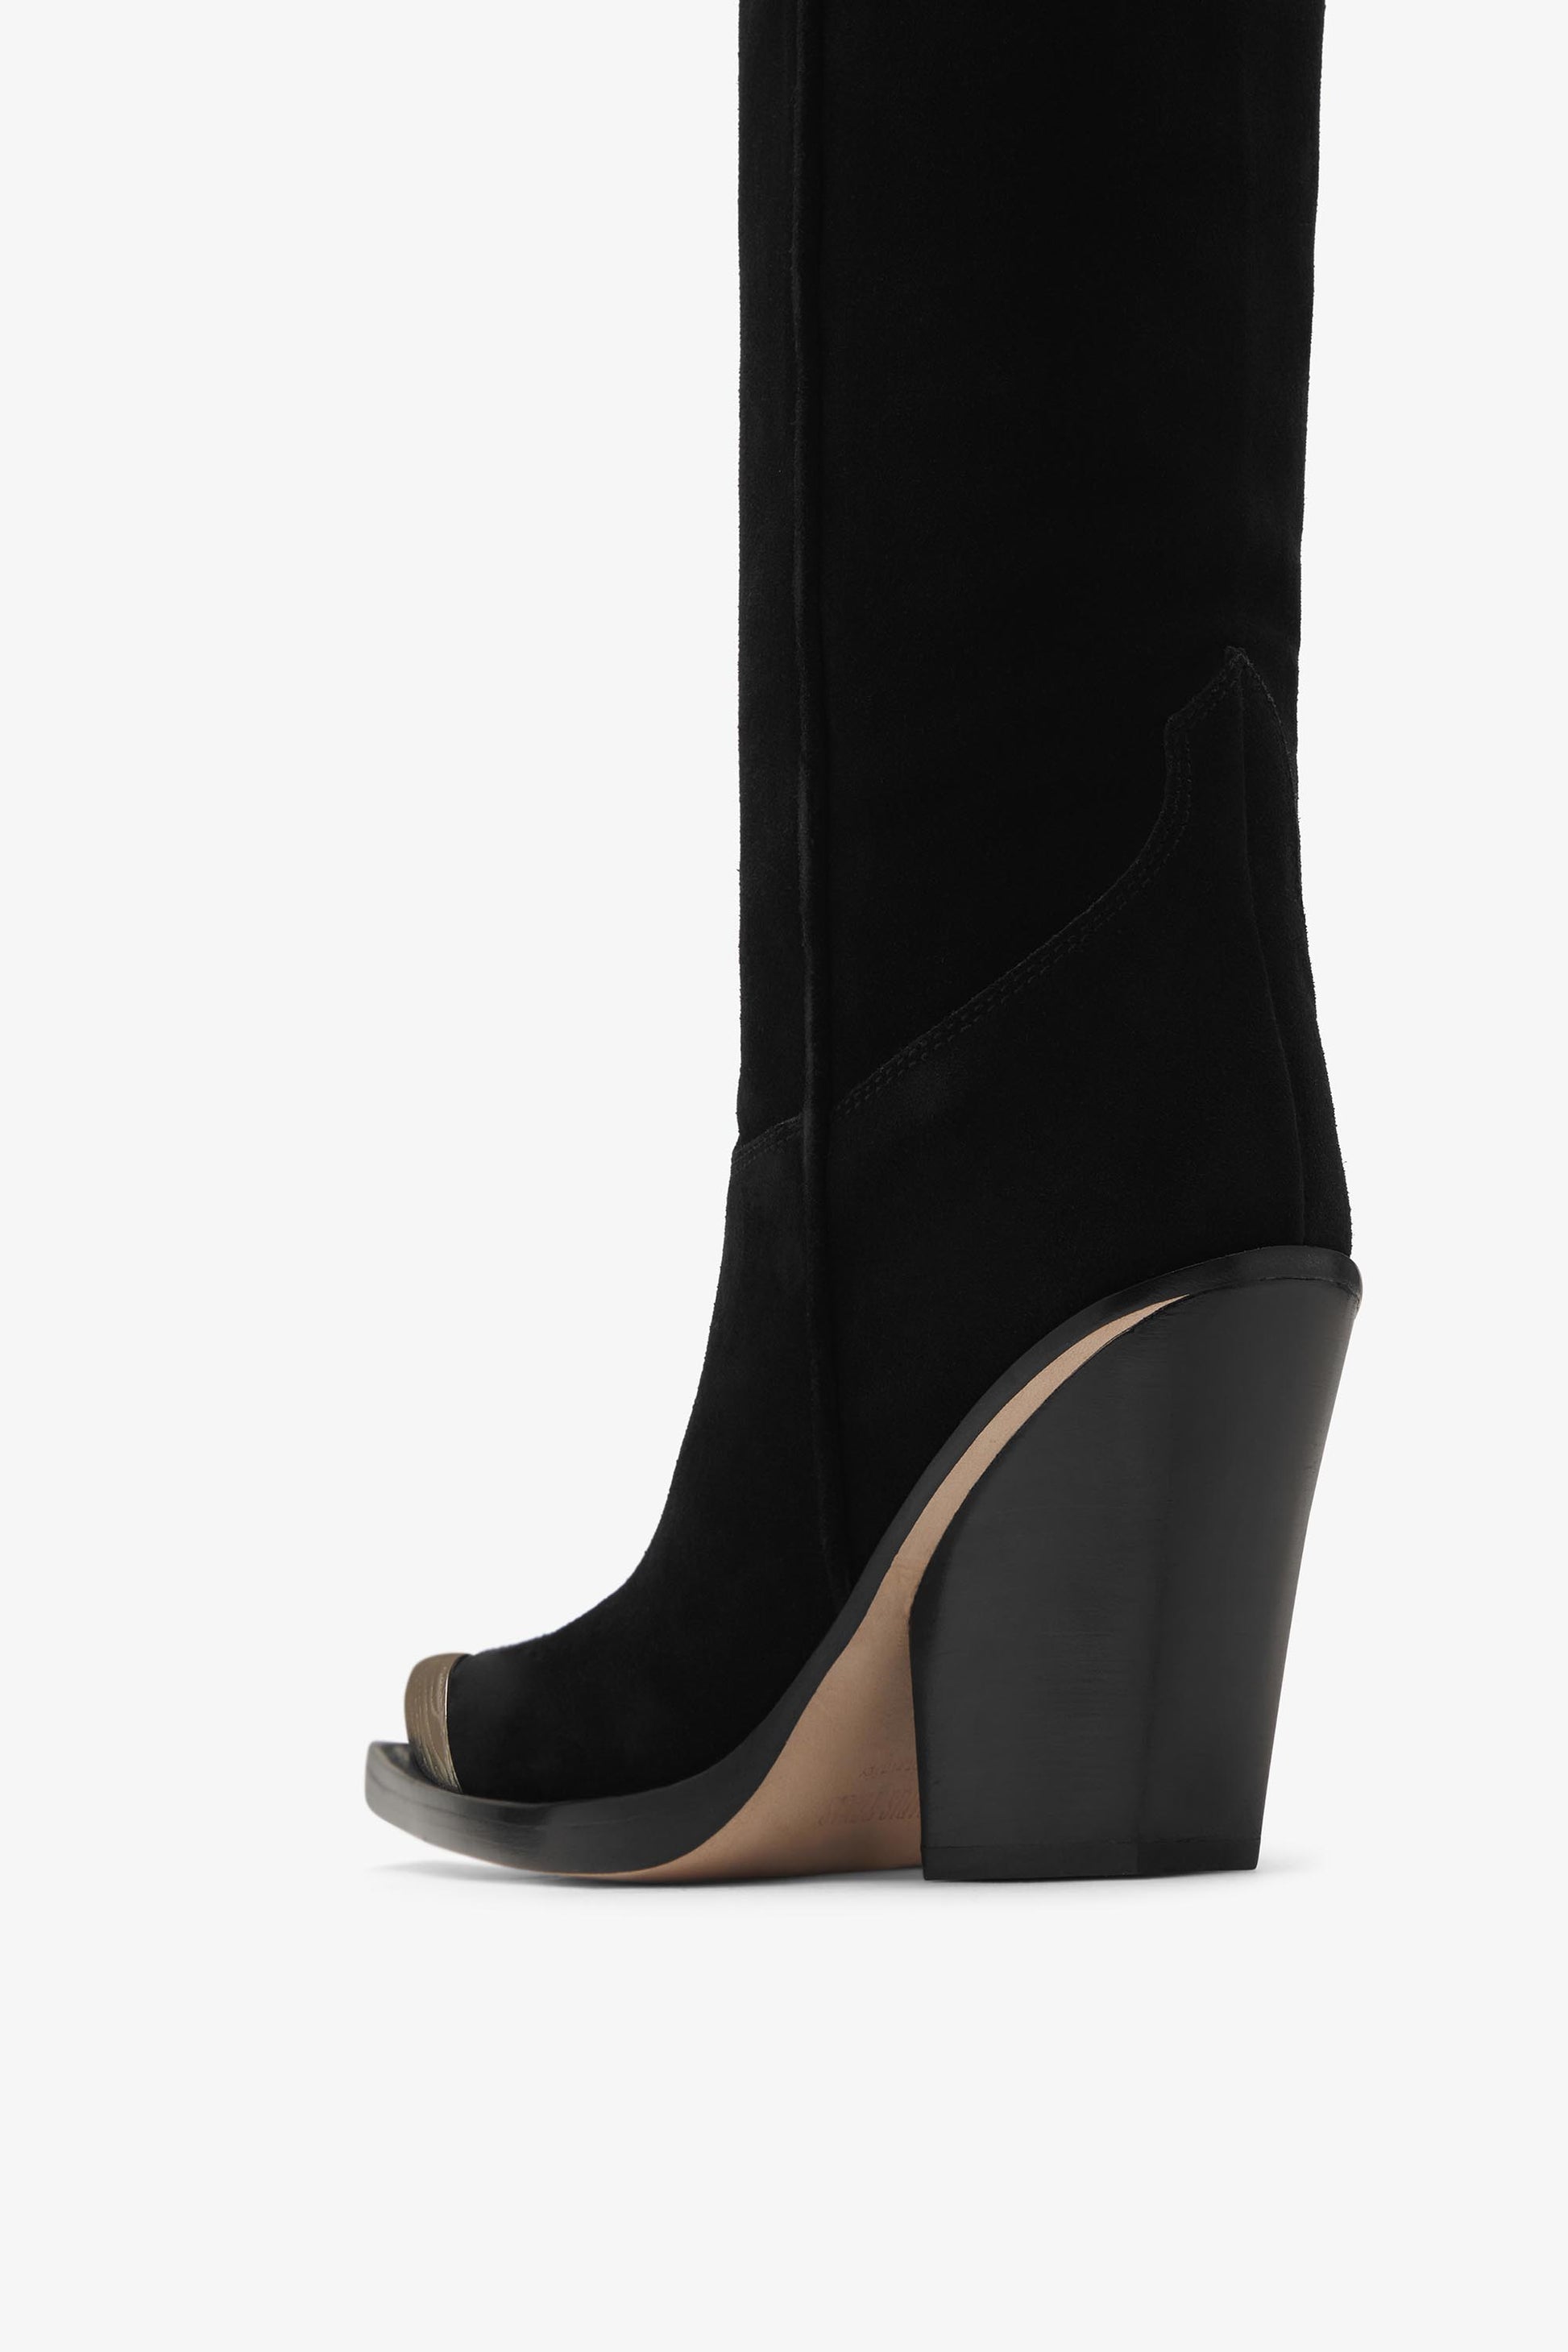 Off black calf suede boots with metallic toe